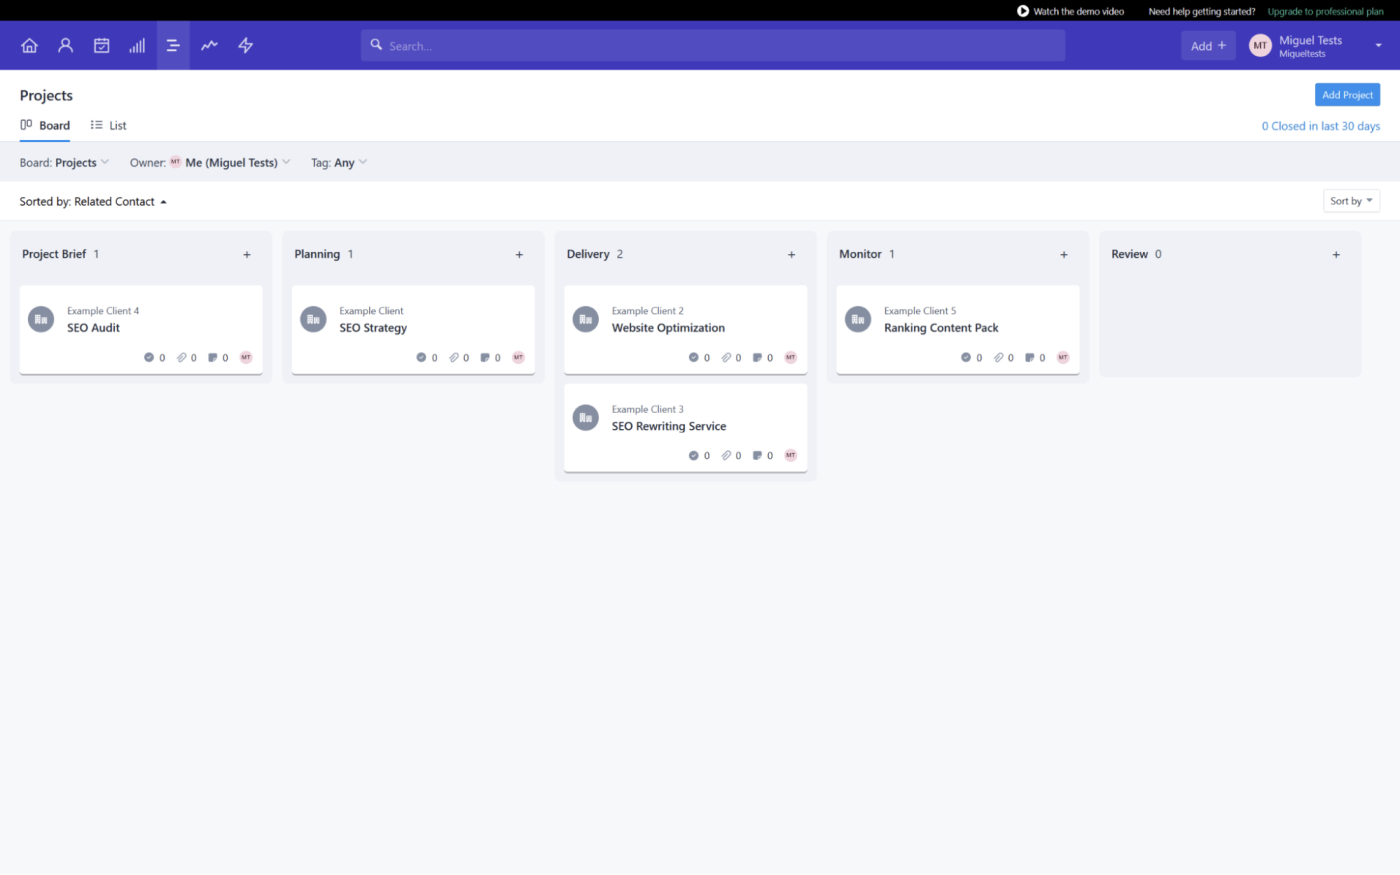 Capsule, our pick for the best small business CRM for managing projects